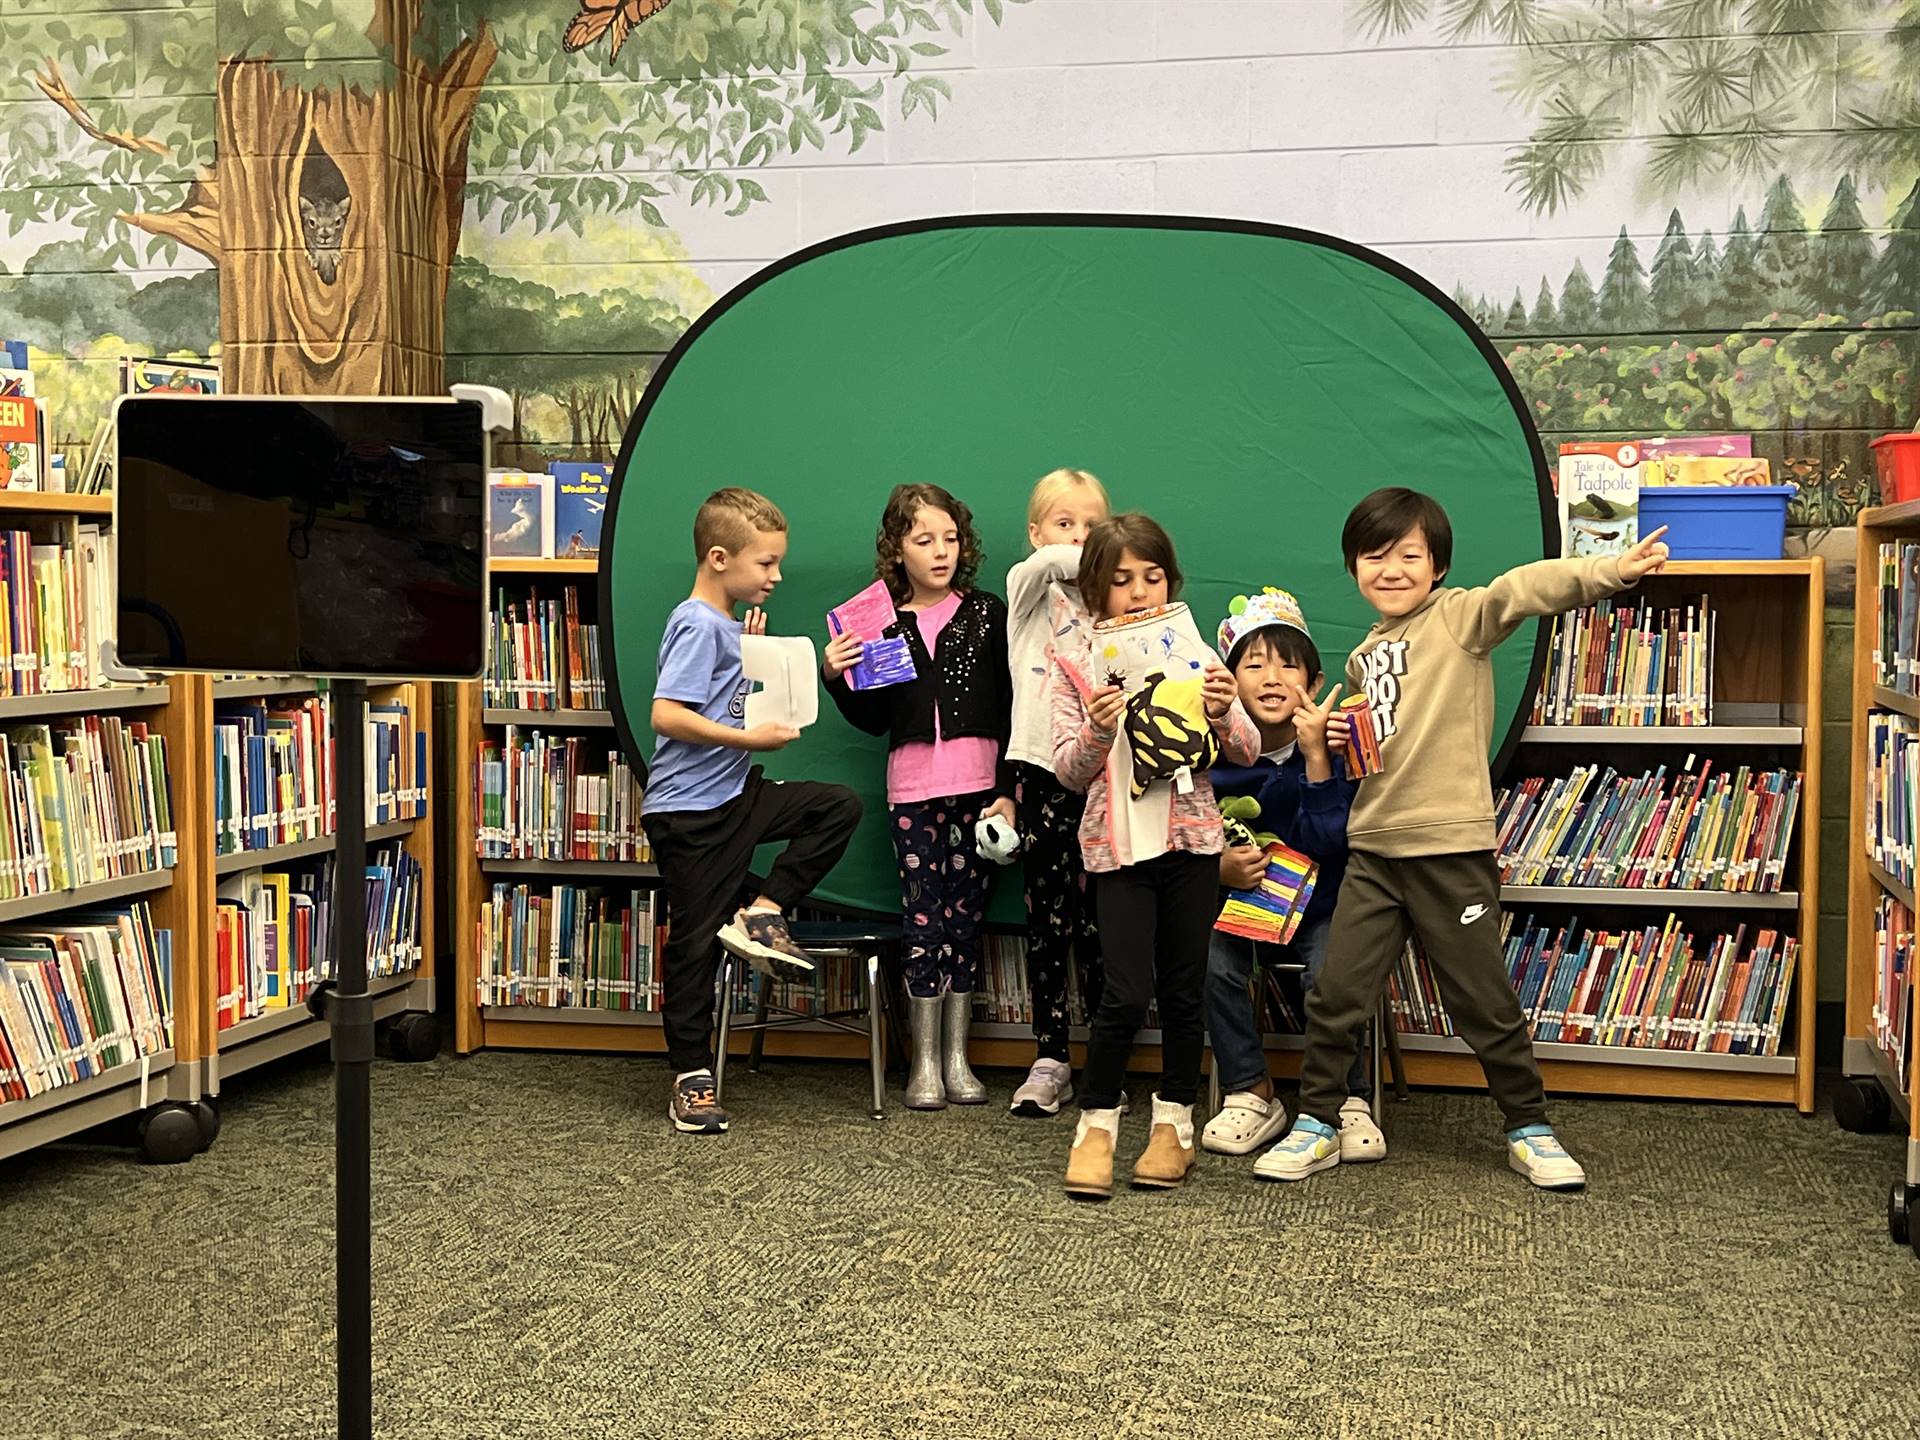 1st grade students engaged in videography project.